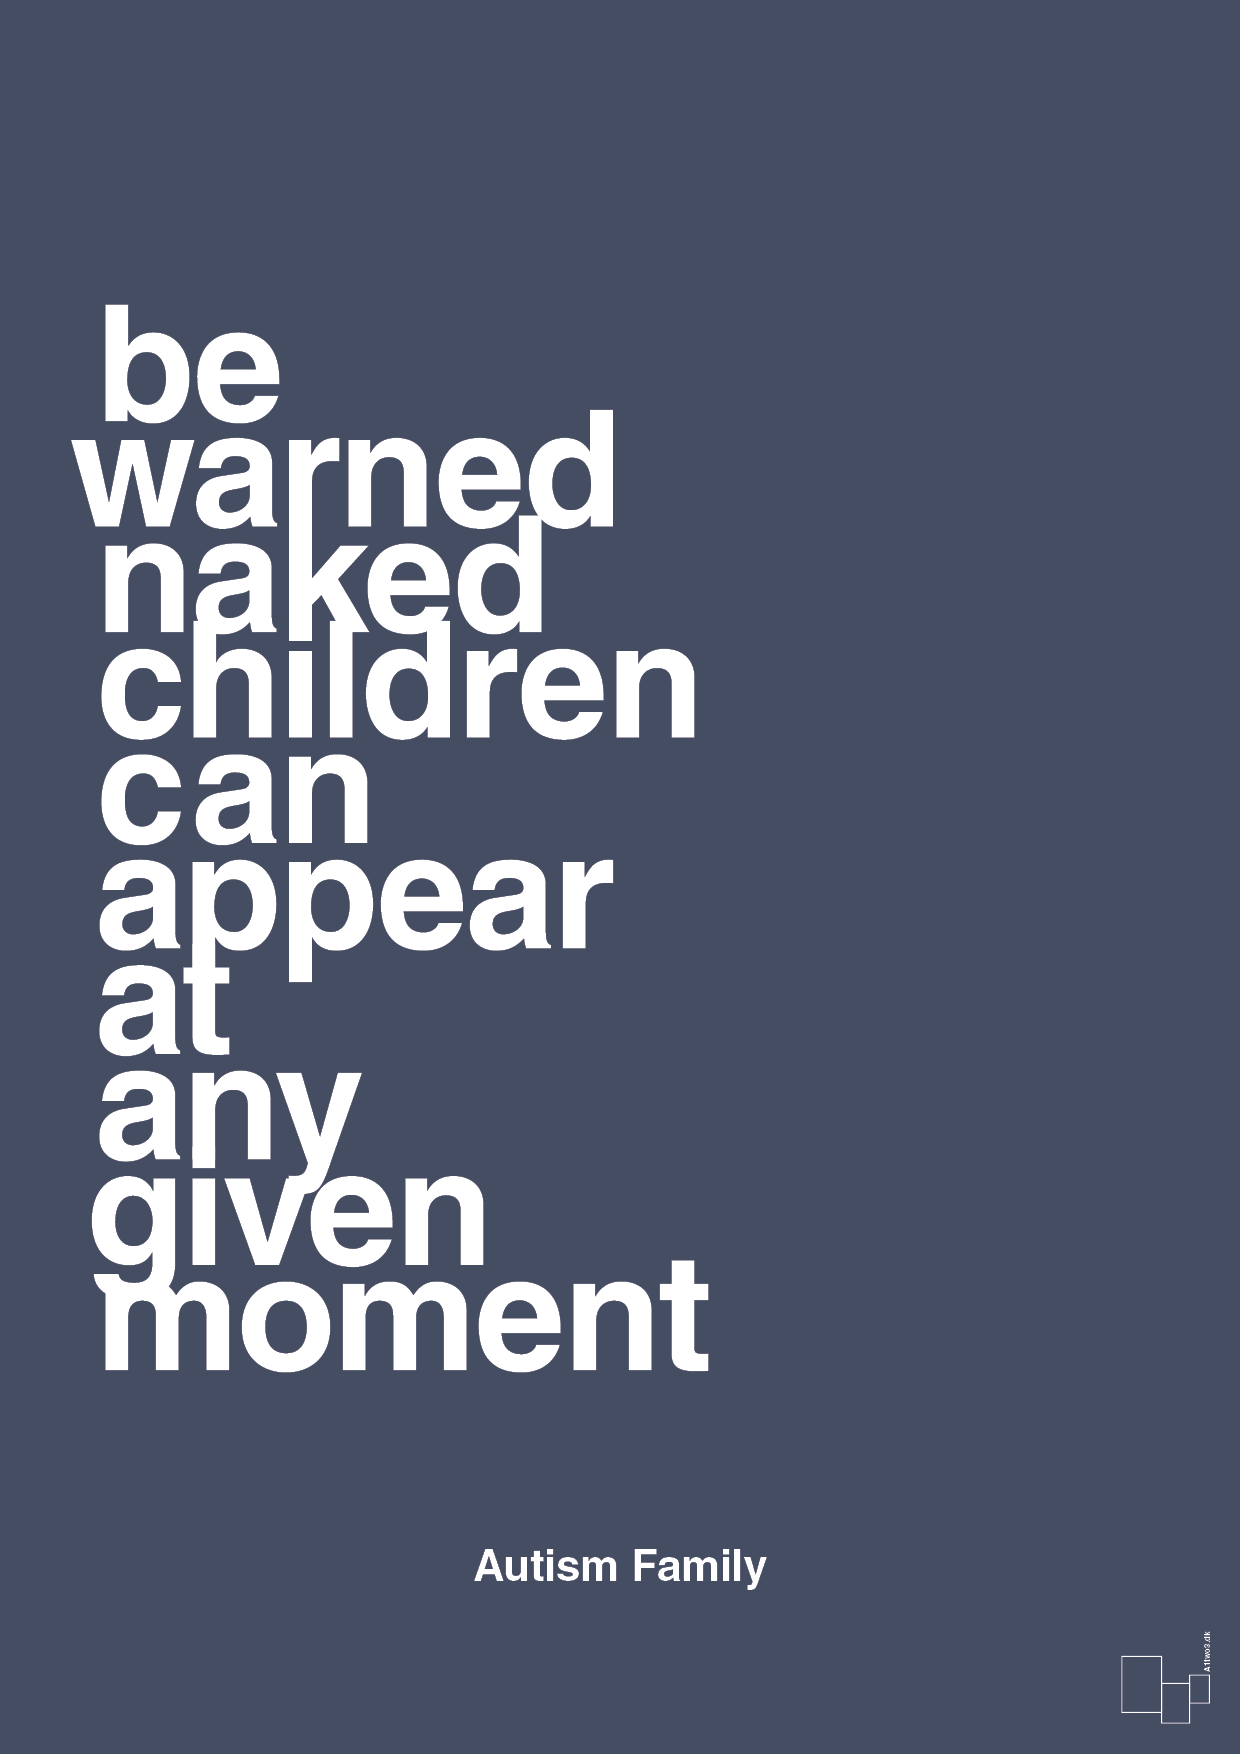 be warned naked children can appear at any given moment - Plakat med Samfund i Petrol